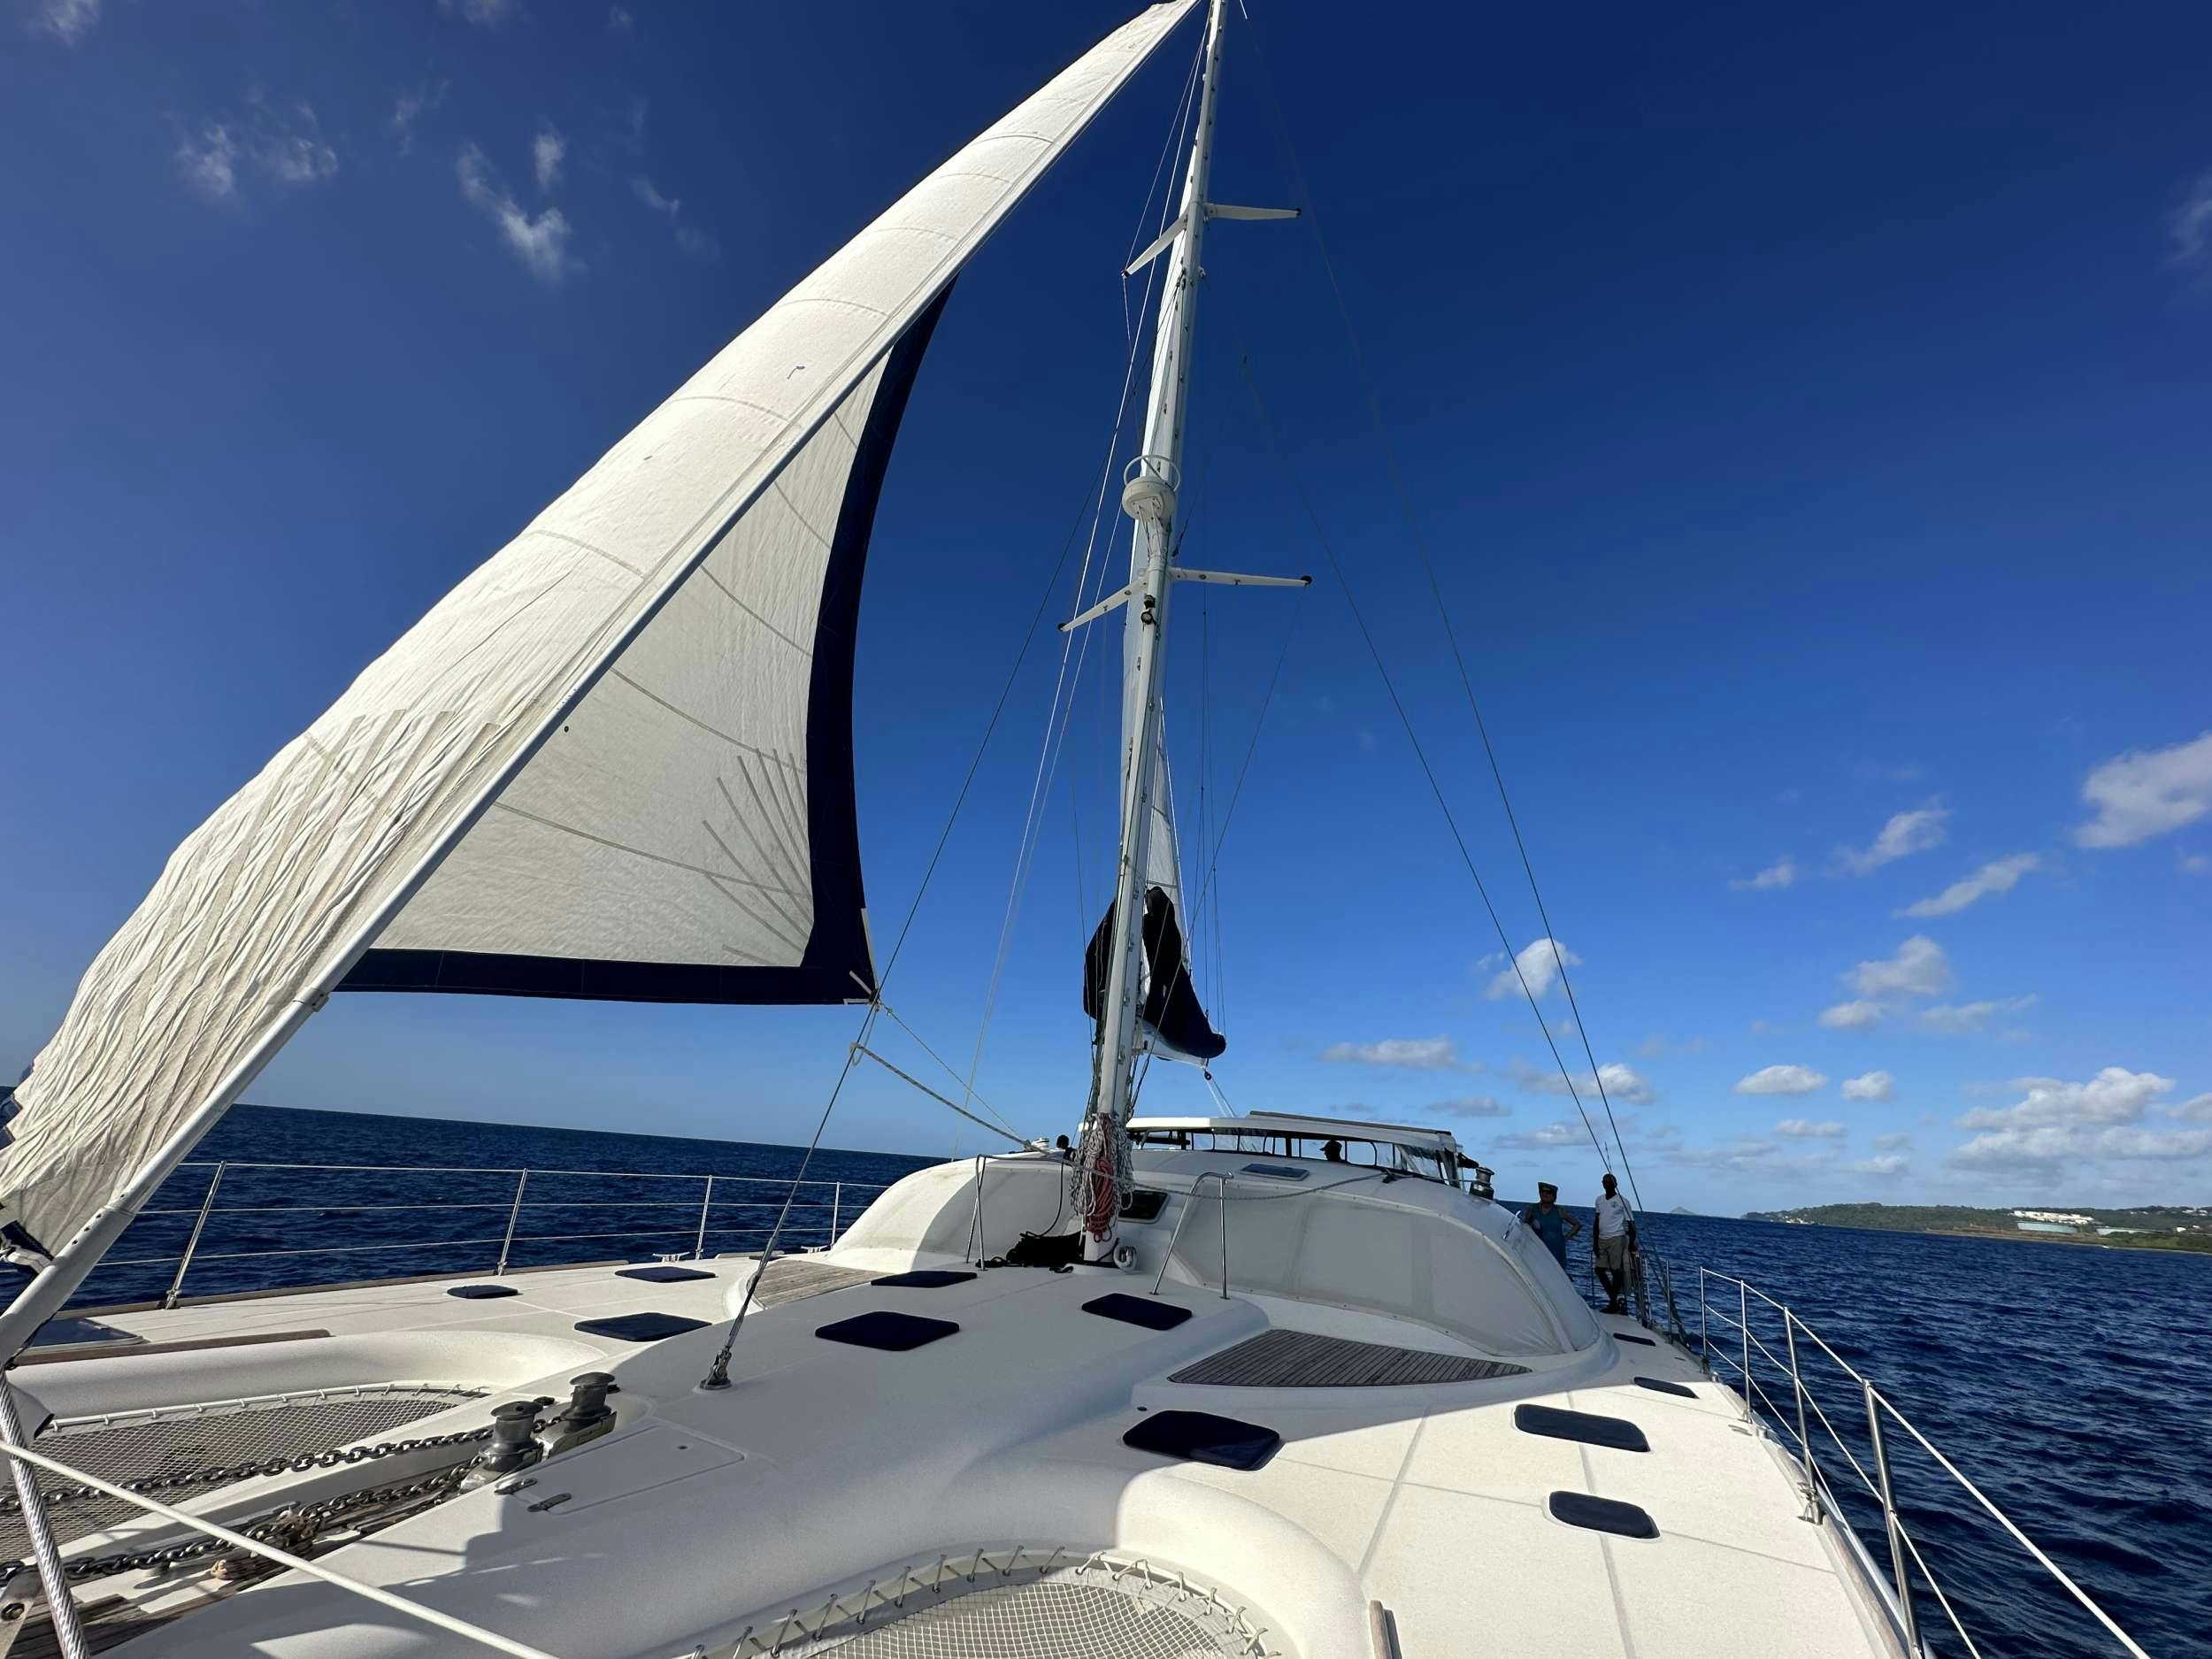 Lady Marigot - Yacht Charter Marsh Harbour & Boat hire in Caribbean 1